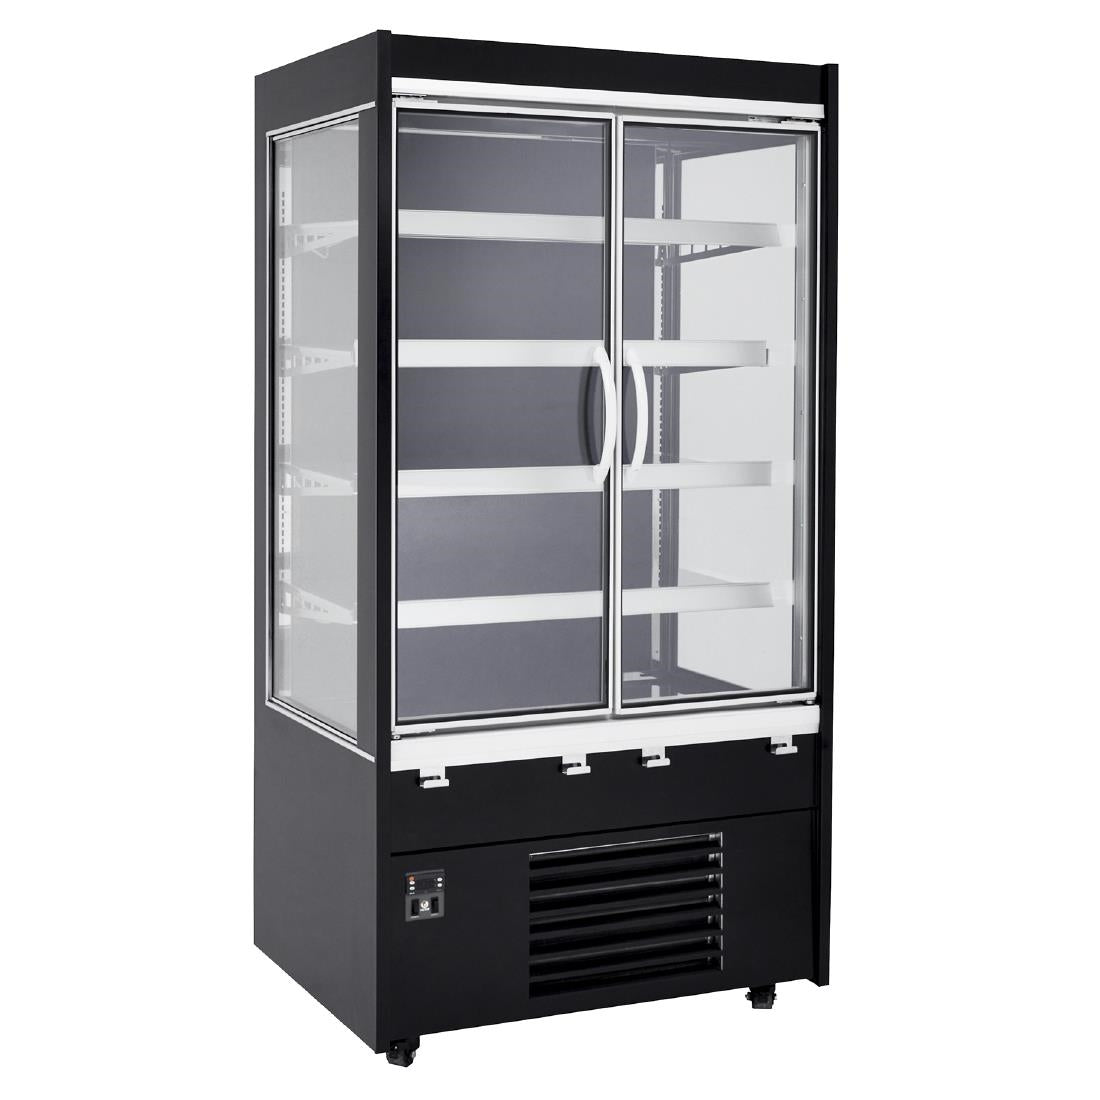 DP591 Victor Maxiline 900mm Standard Depth Multideck With Doors MAXI090-VD-MT-G-GY